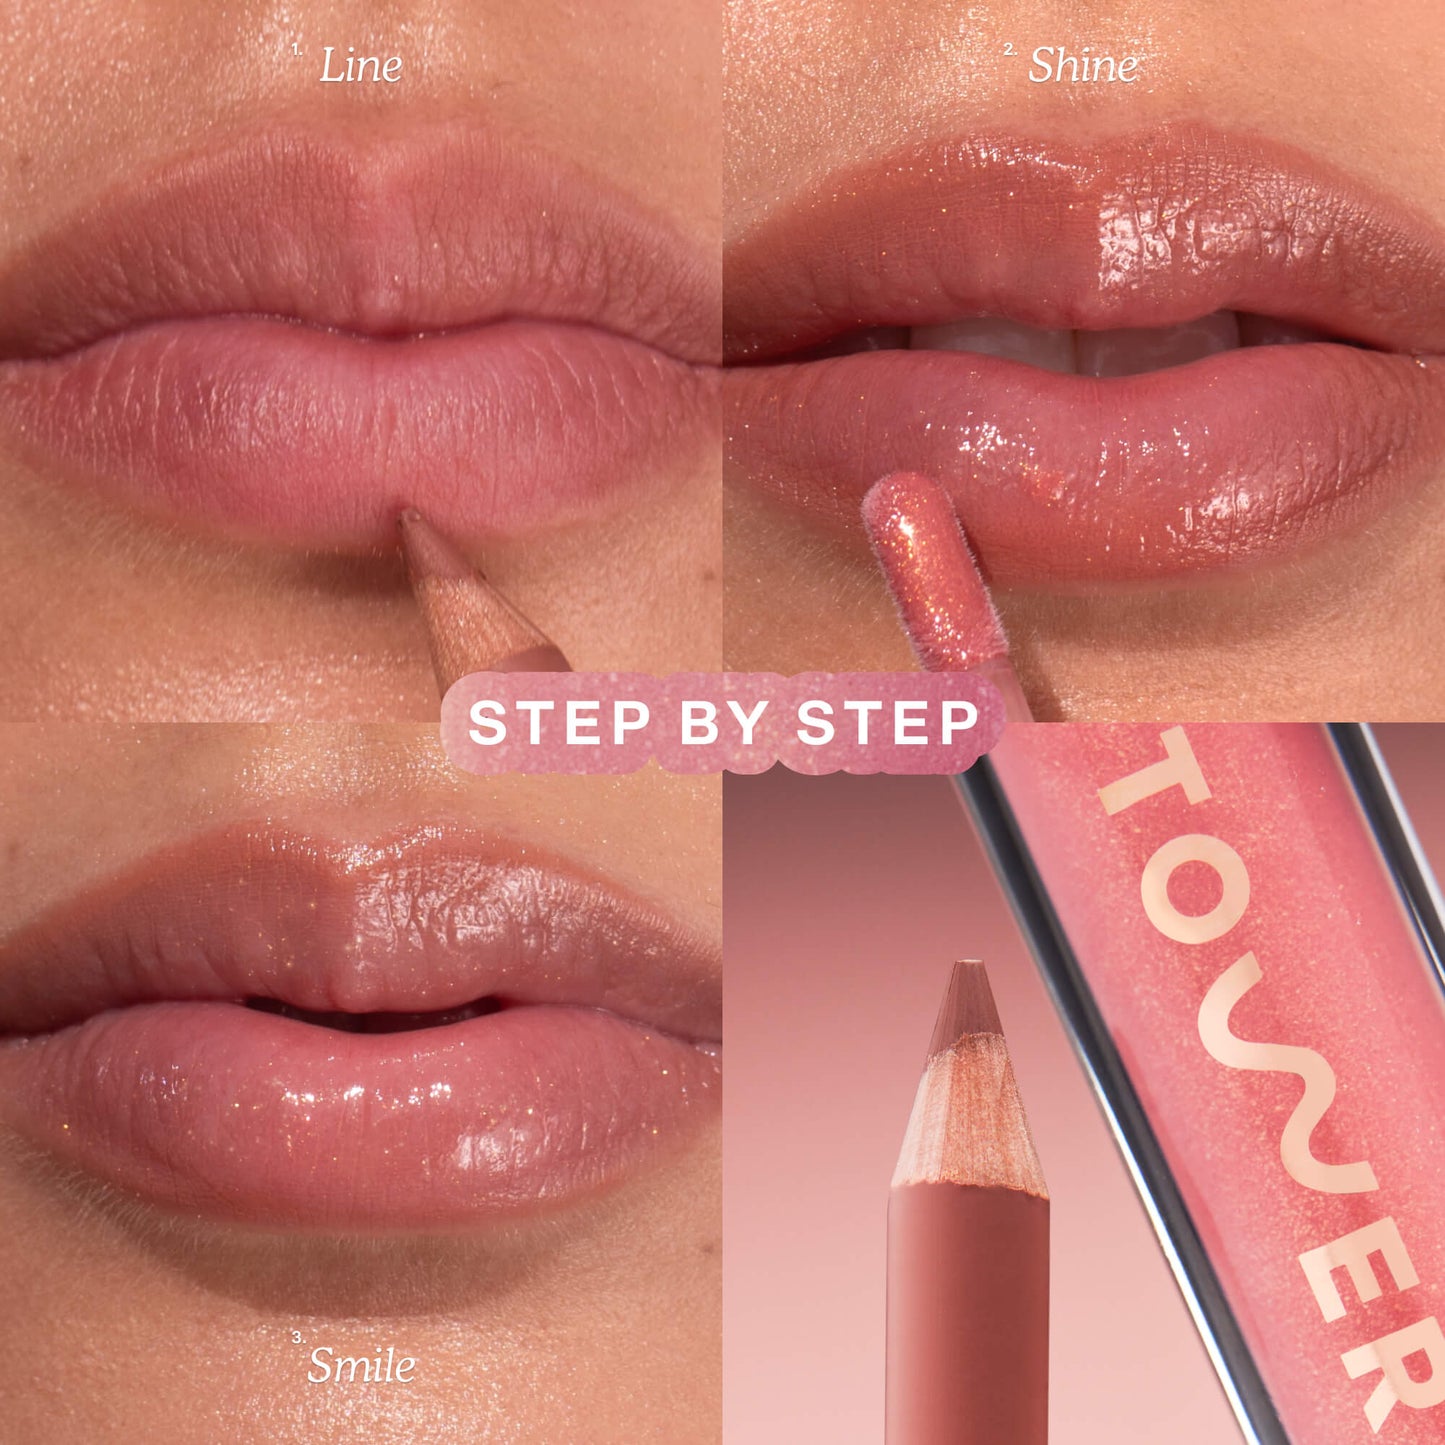 [Shared: A model wearing the Tower 28 Beauty Line + Shine Lip Kit  on her lips.]